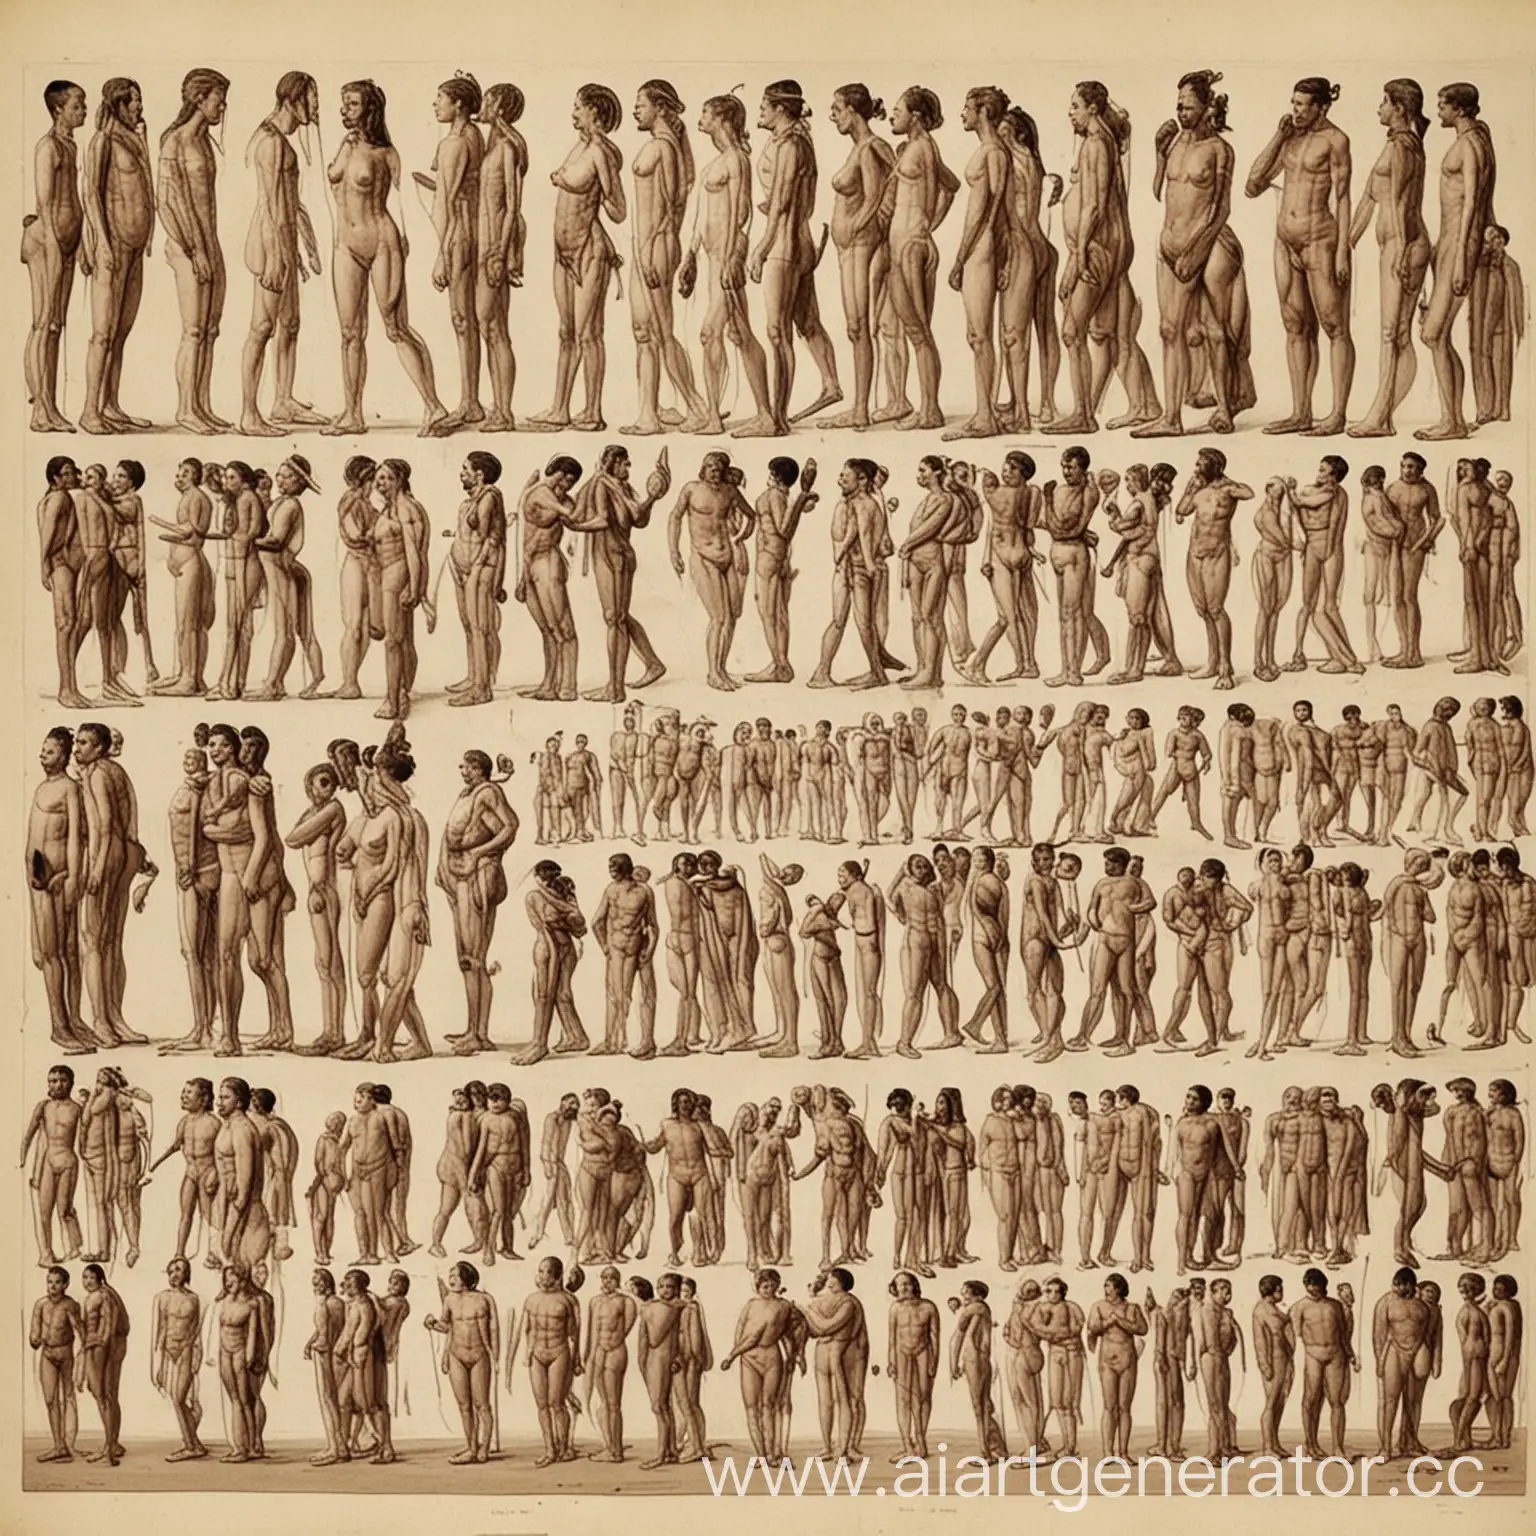 Reproduction-of-People-Art-Diverse-Human-Figures-in-Artistic-Style